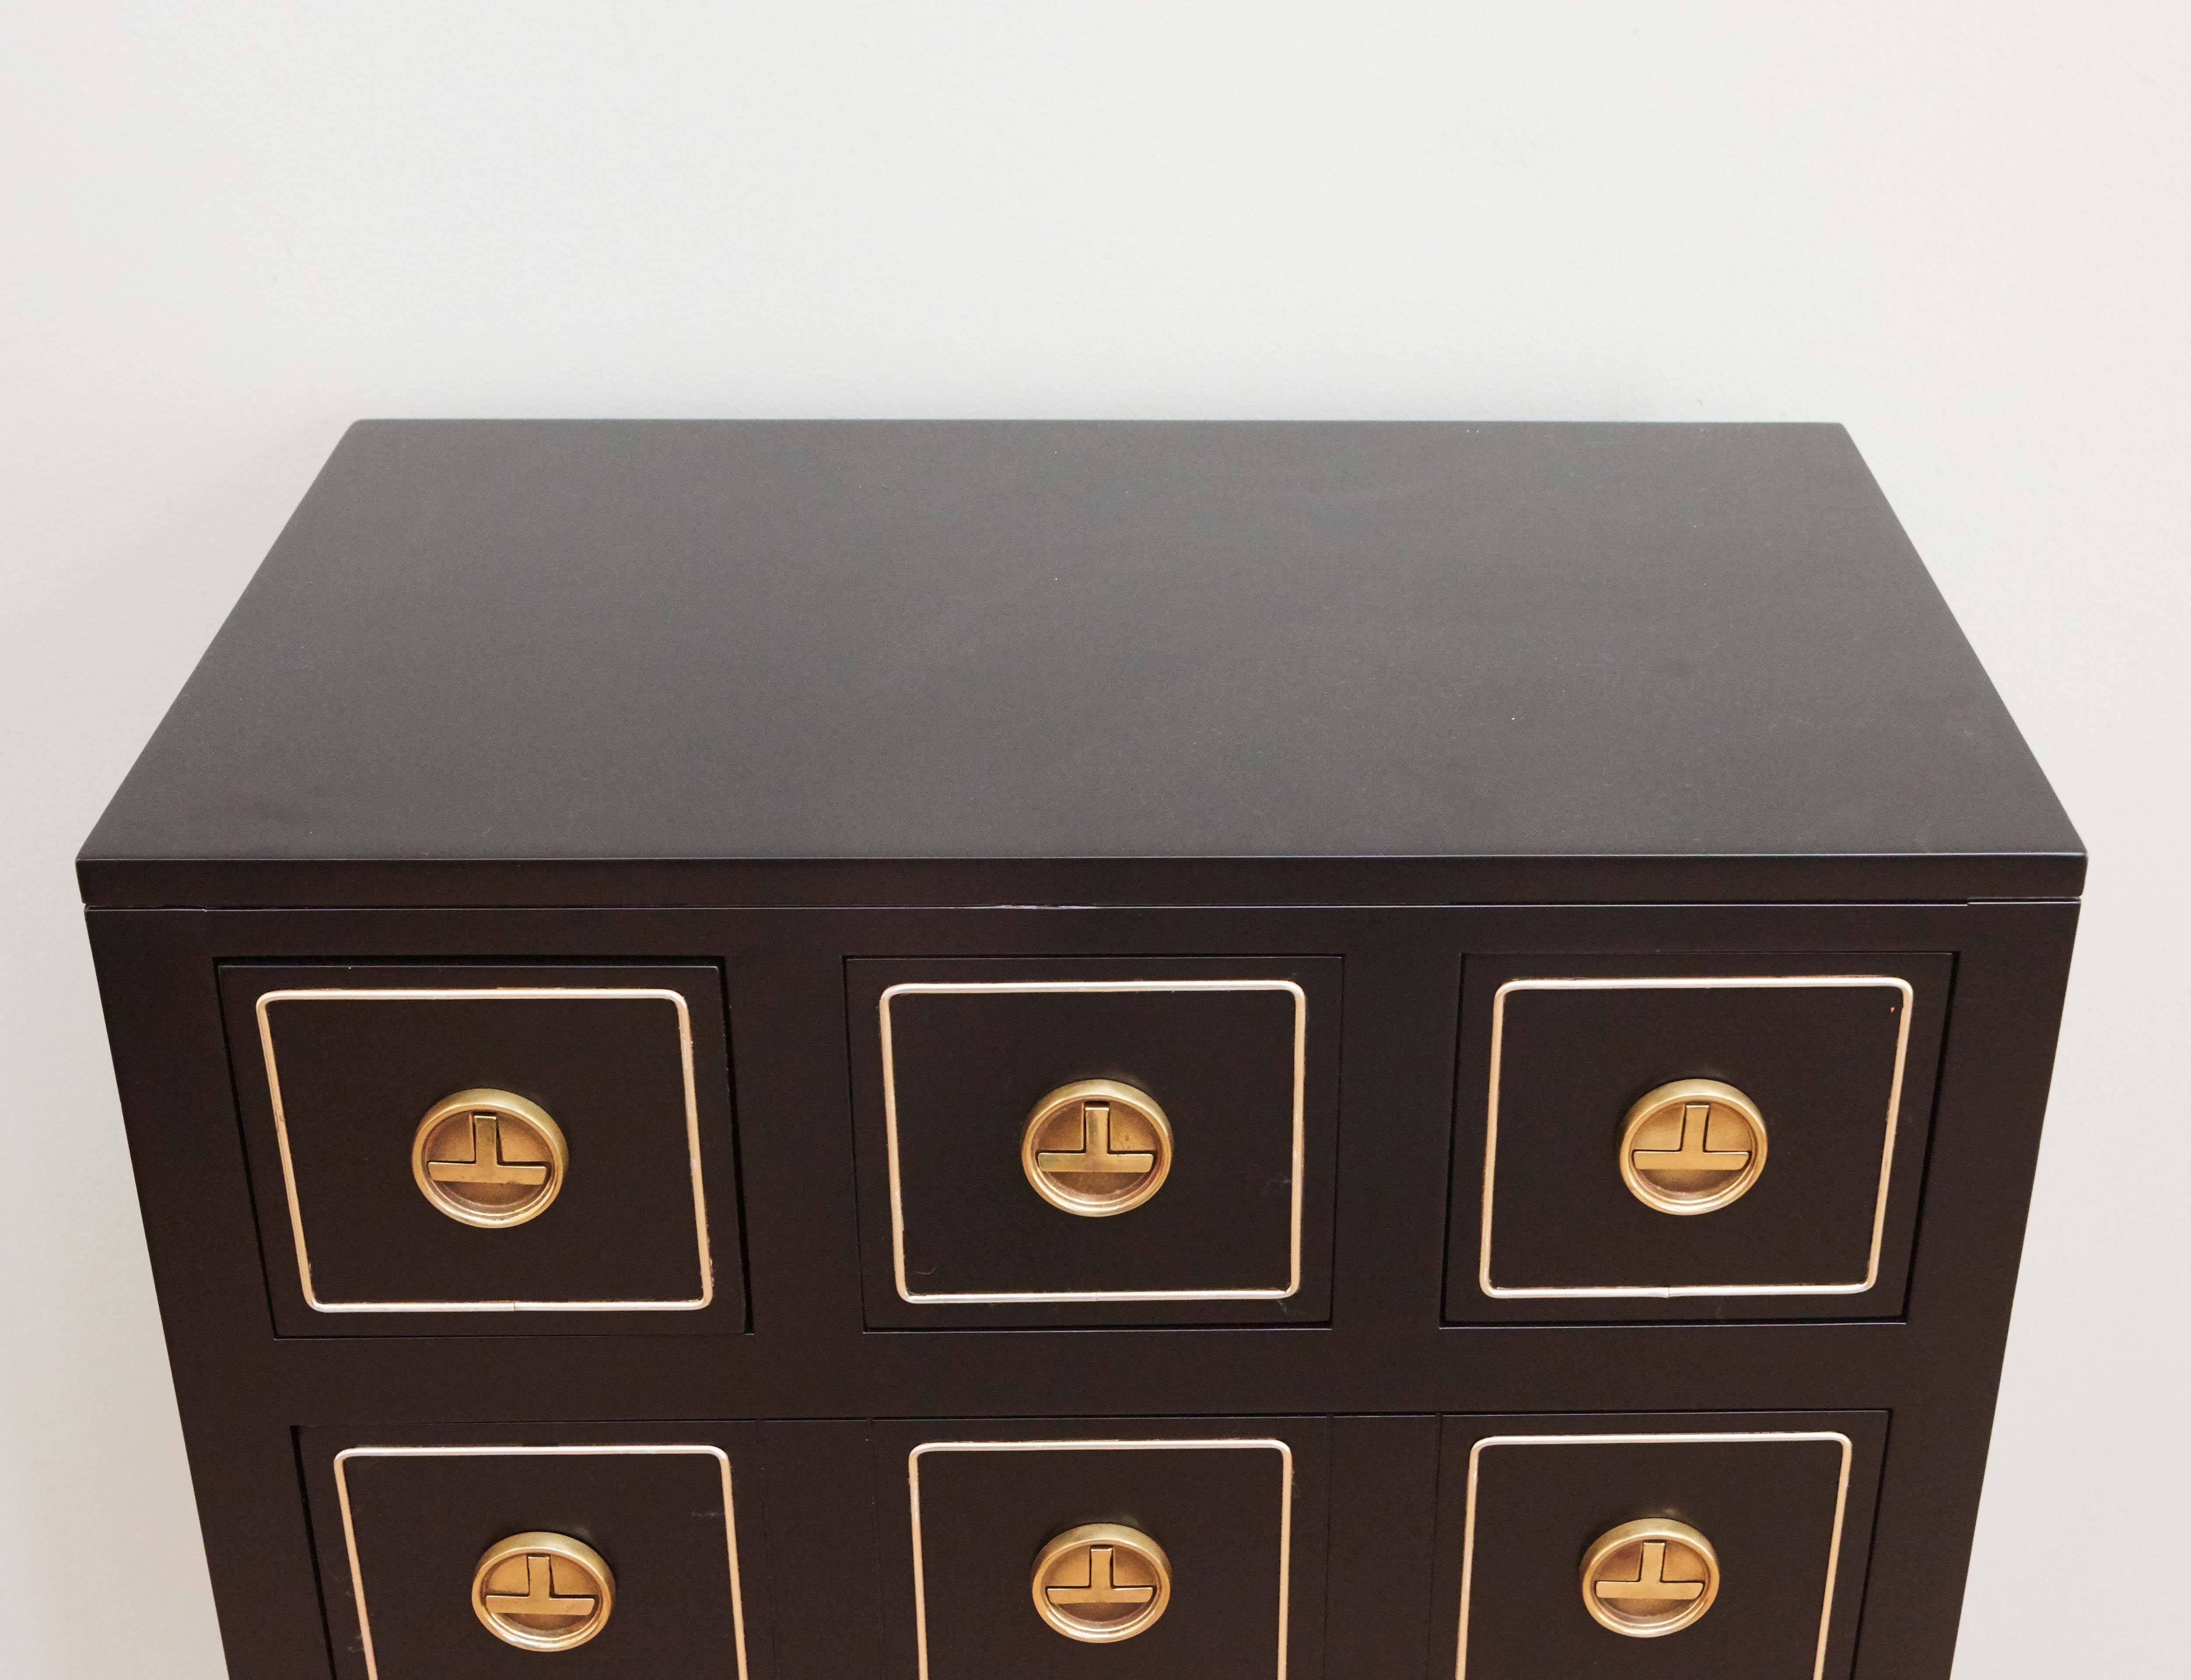 Small dresser with brass hardware. Three drawers on top row. Bottom two rows have faux three drawers front but open as two larger drawers as shown in image 4.
In the style of Dorothy Draper.